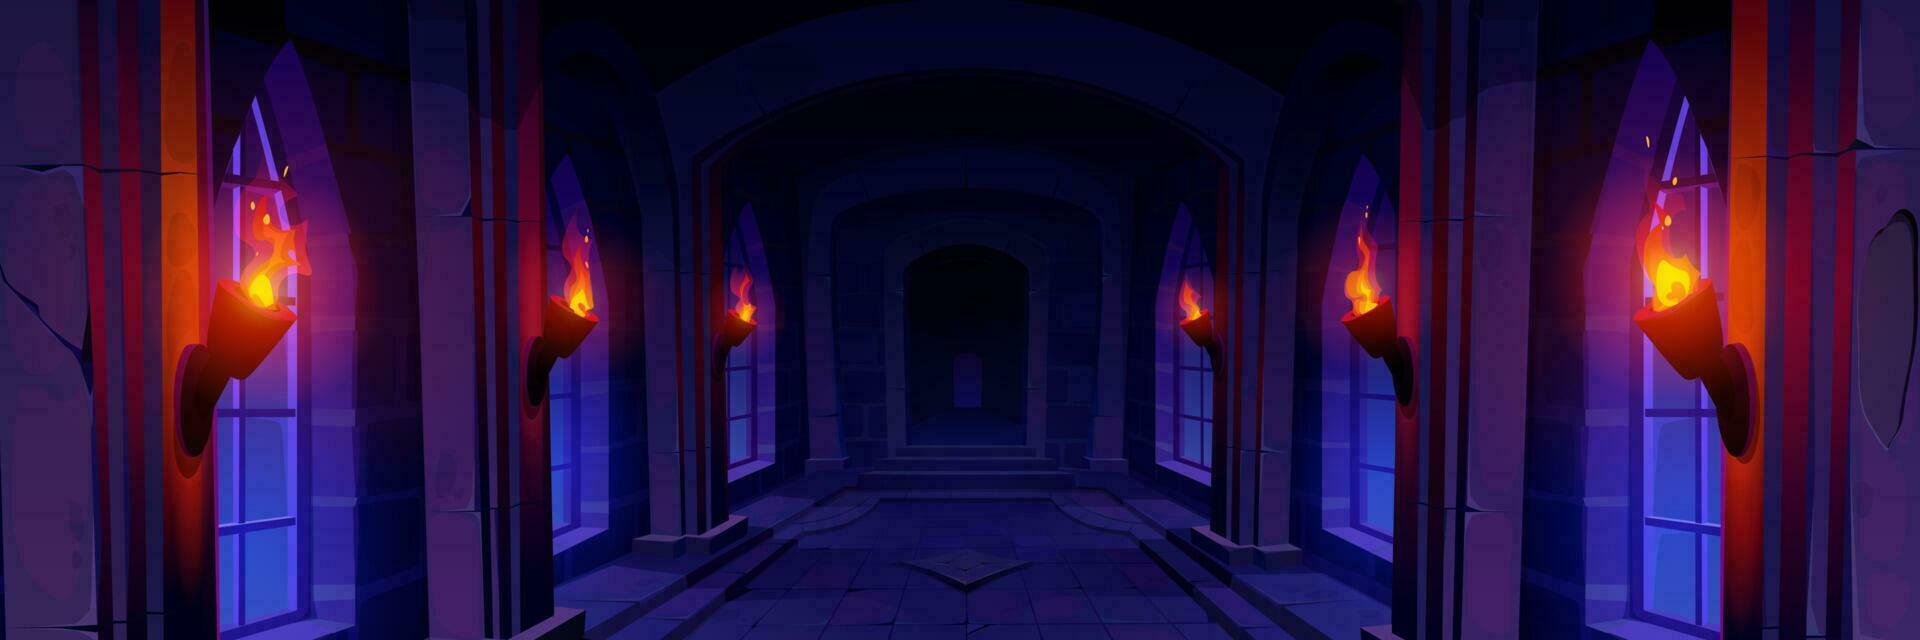 Medieval stone castle game background at night vector